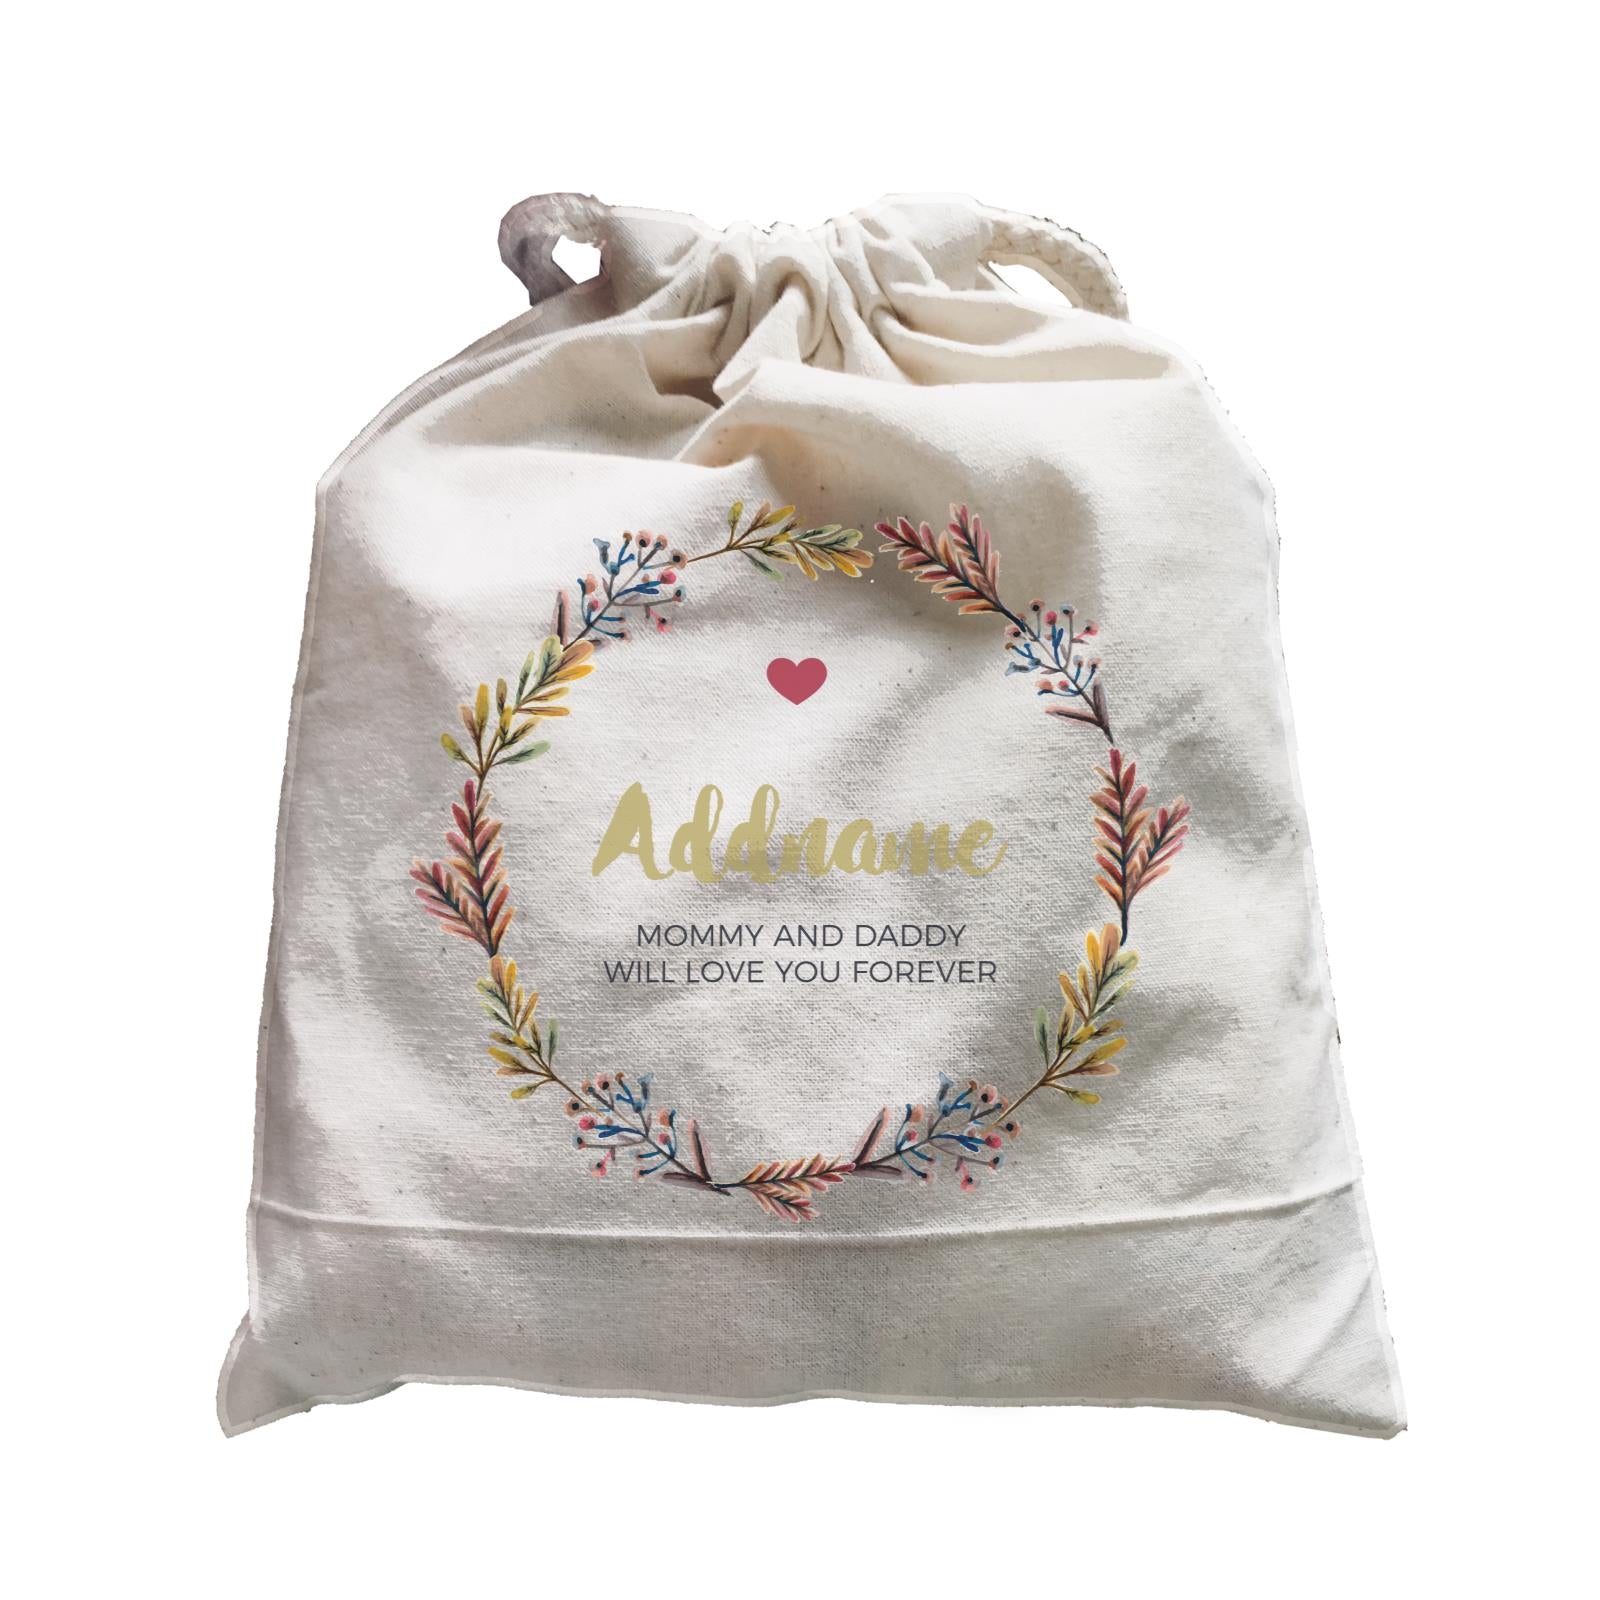 Autumn Colours Wreath Personalizable with Name and Text Satchel